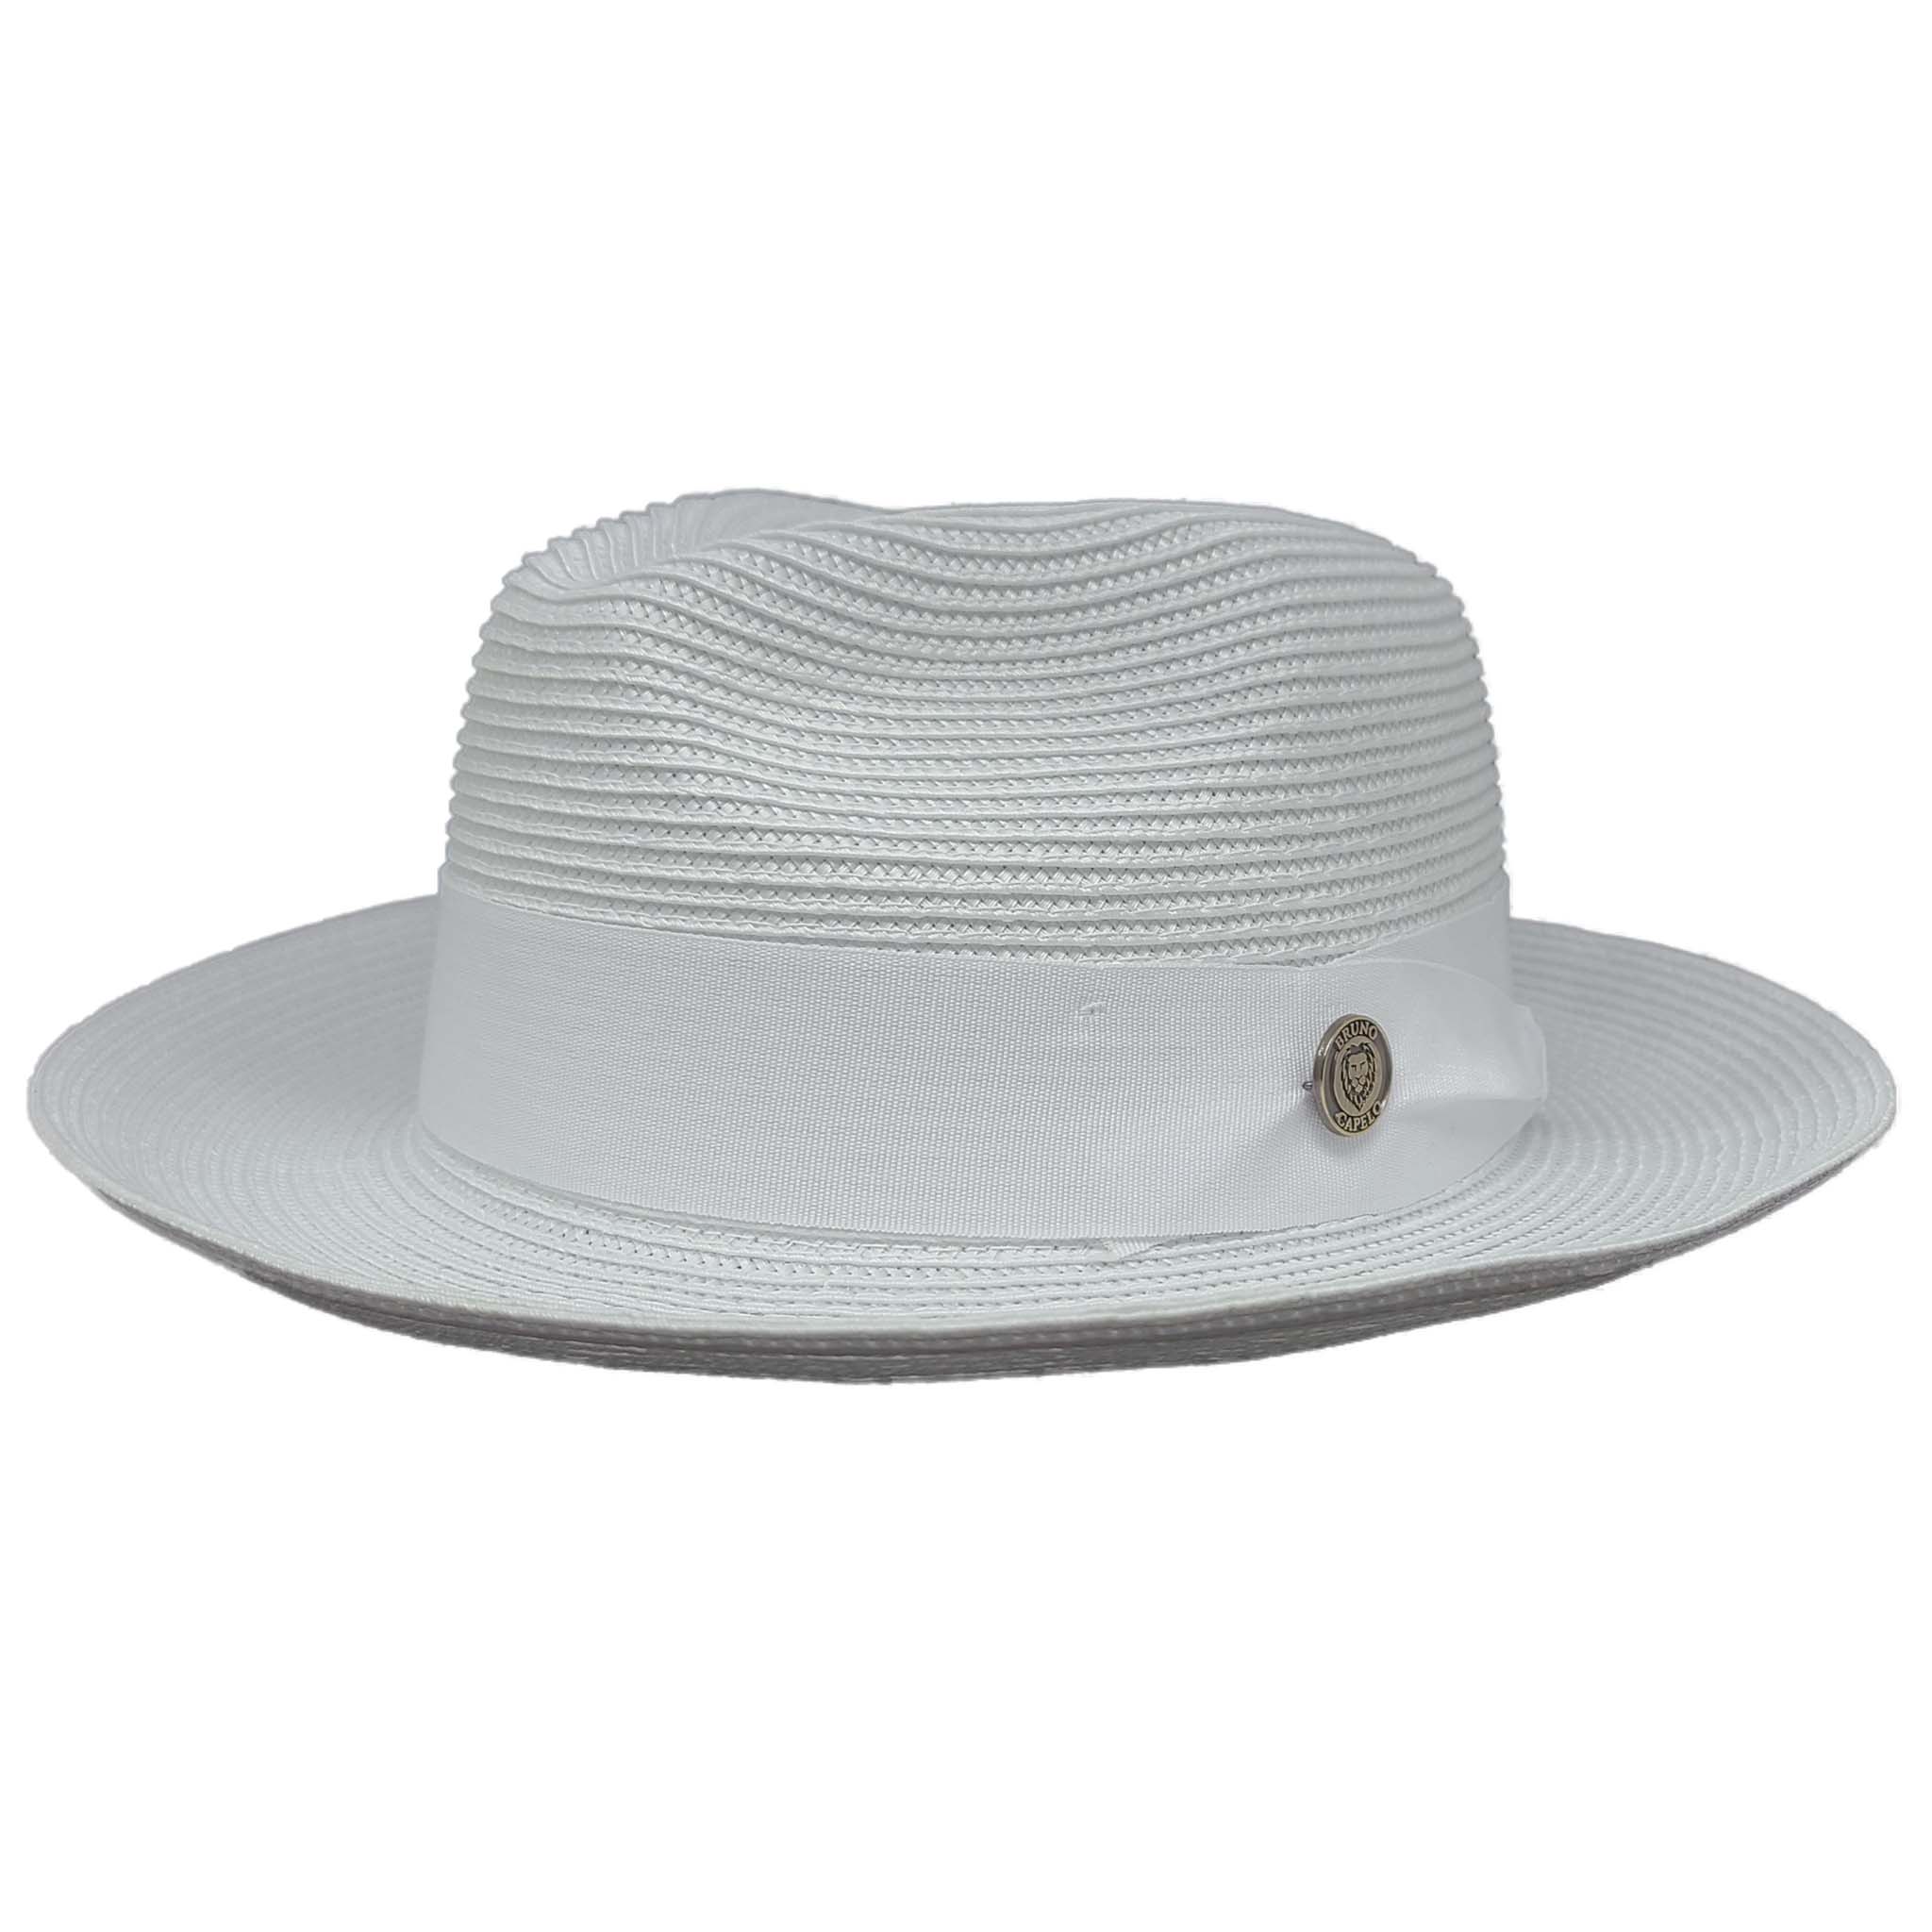 White Straw Fedora Hat - Classic and stylish accessory for men and women, perfect for any outdoor event